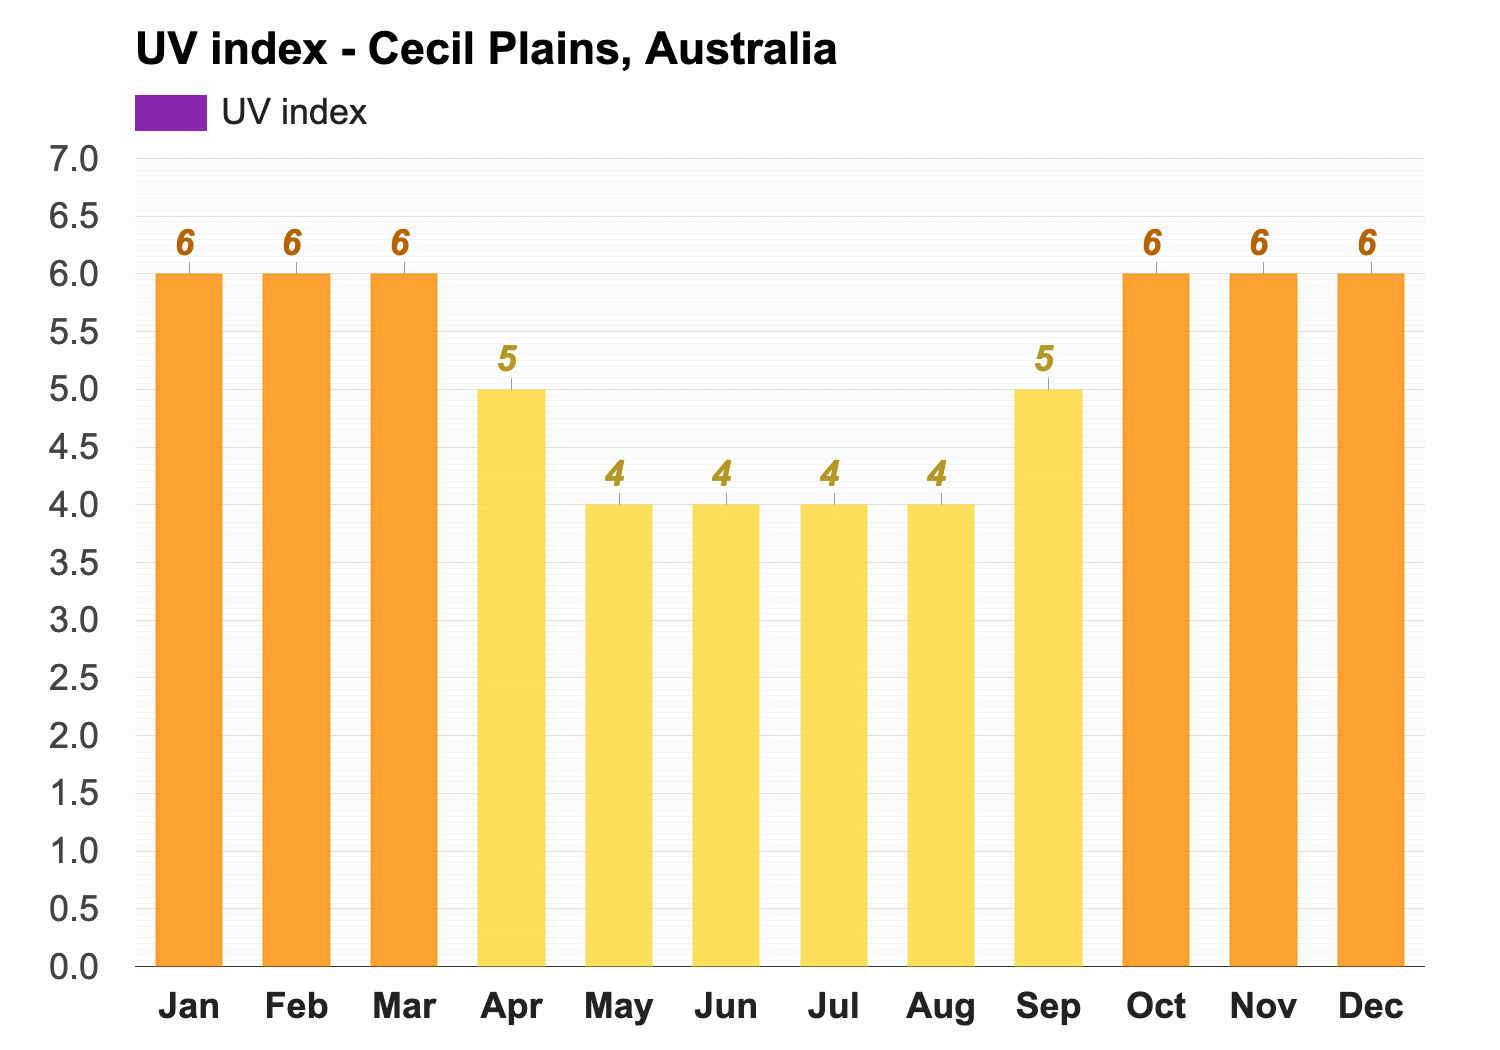 Cecil Plains, Australia - Climate & Monthly weather forecast